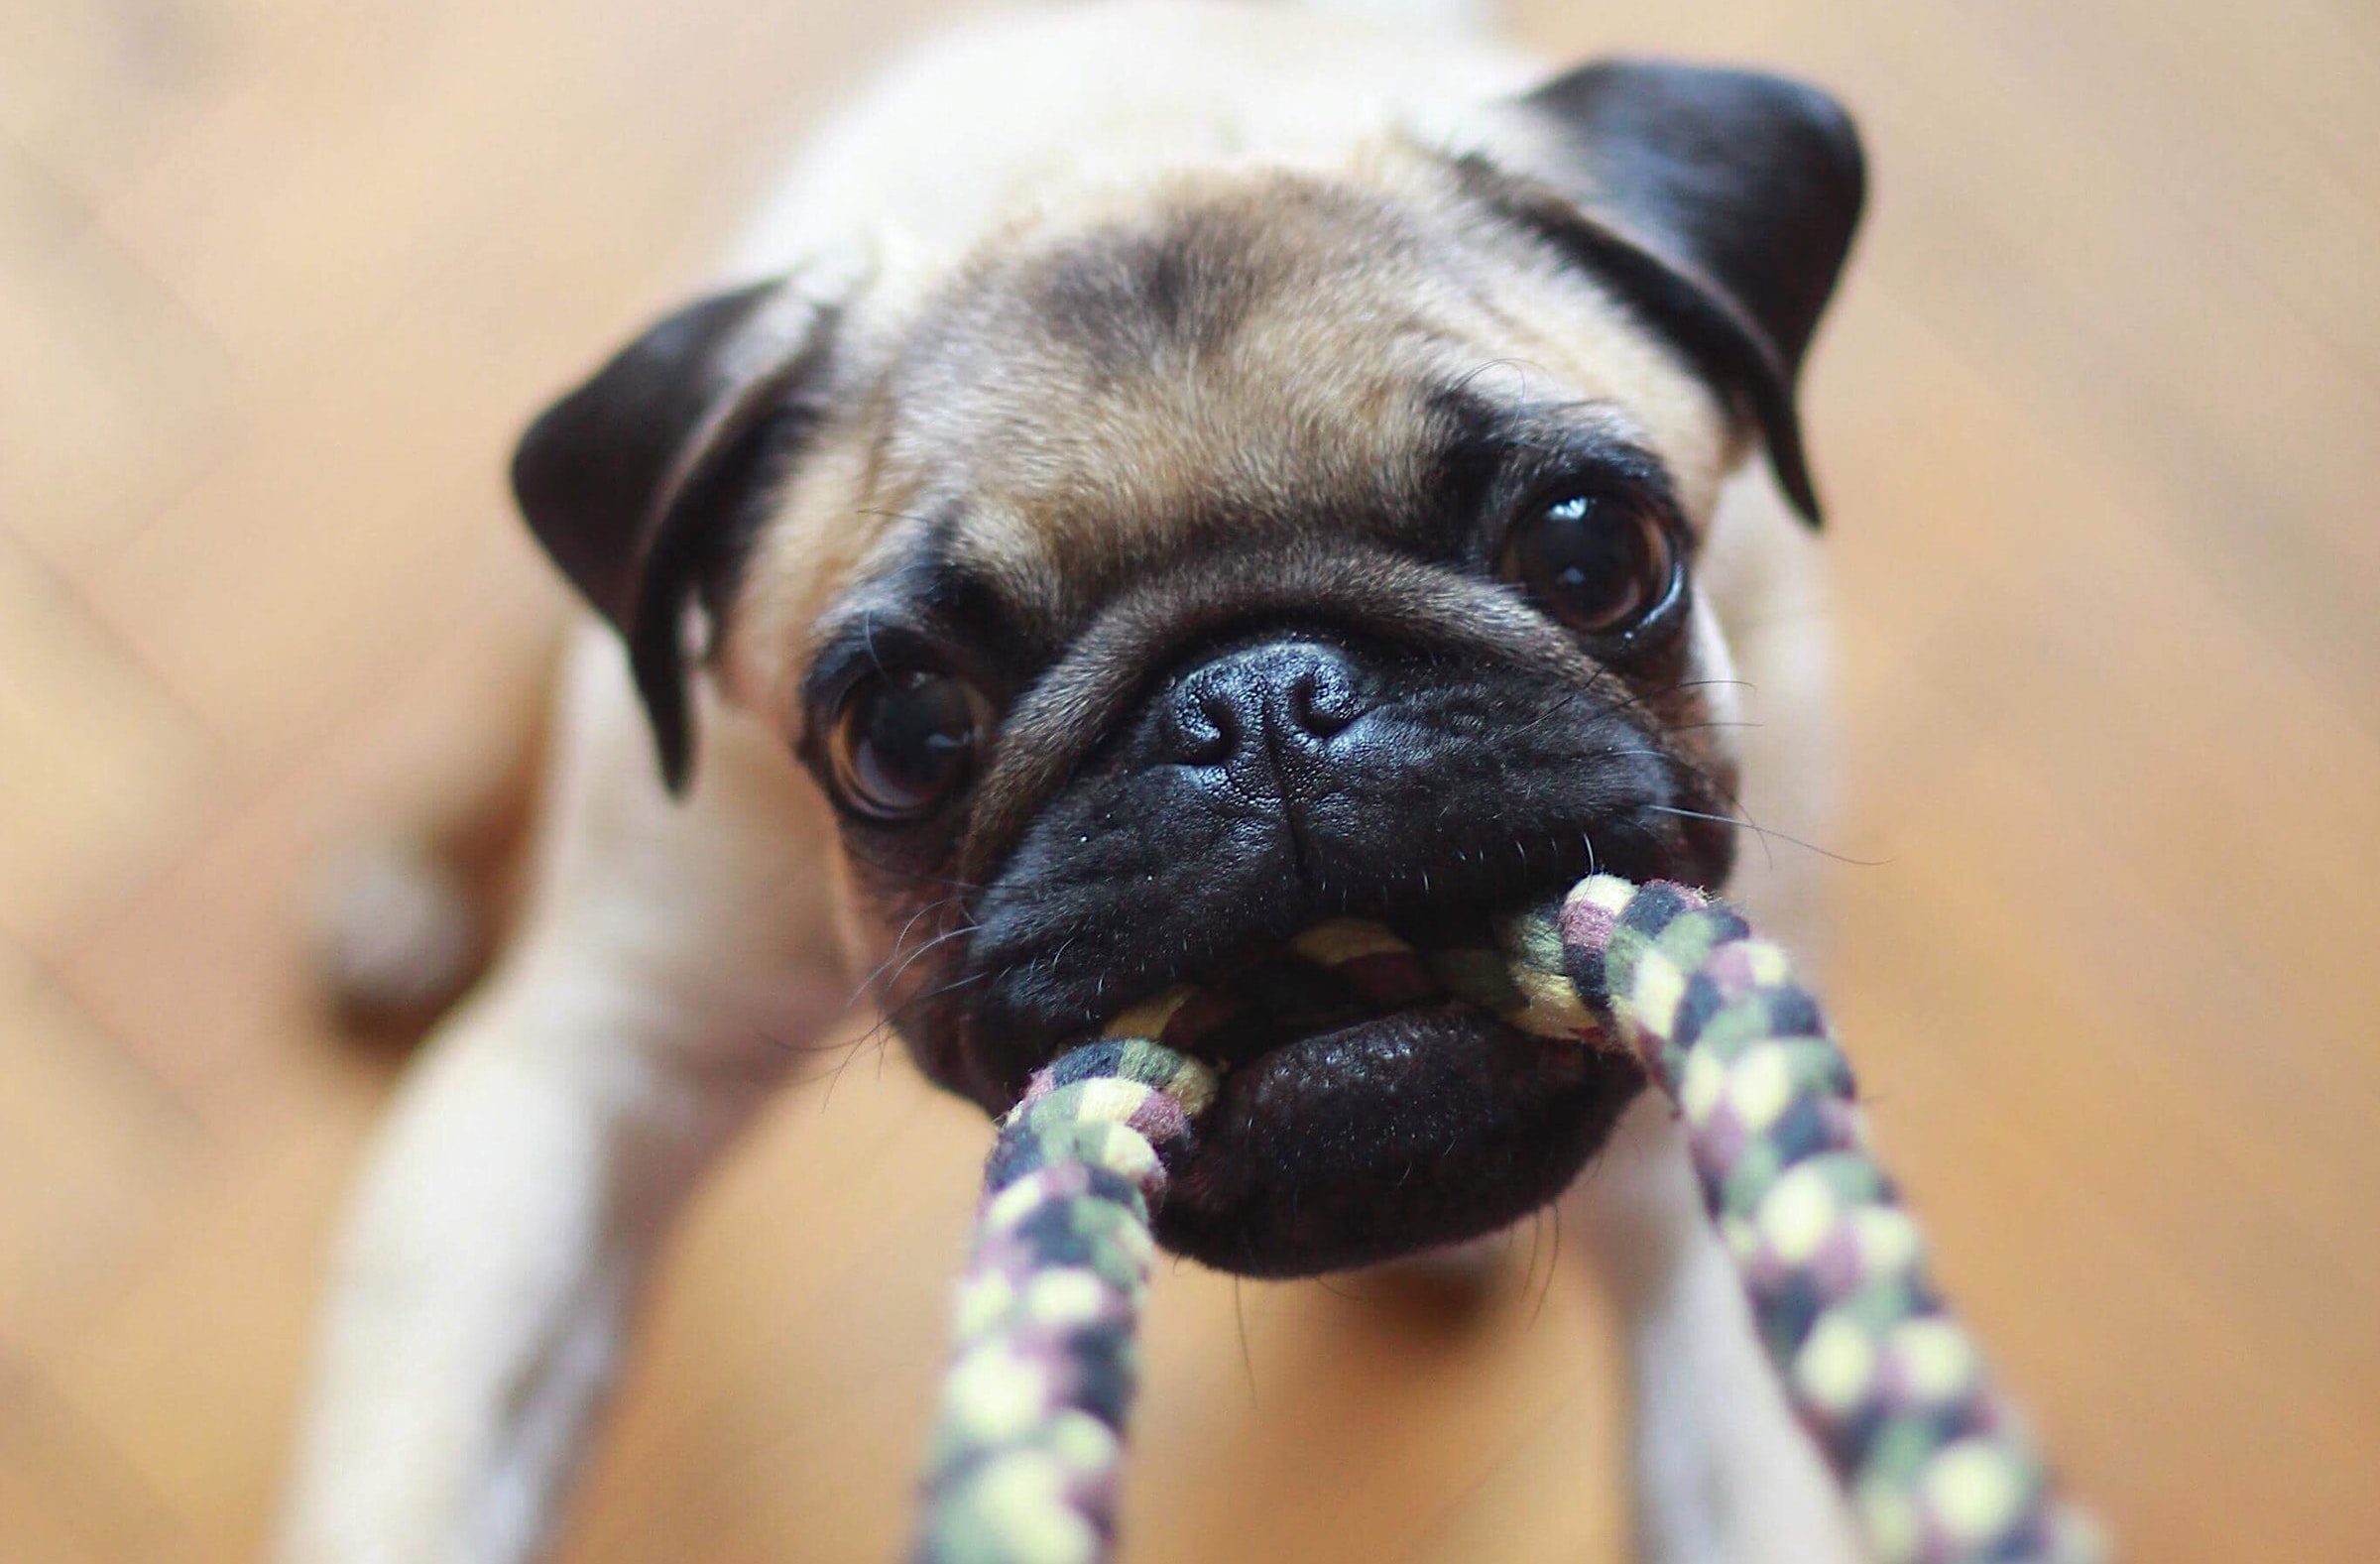 Dog pulling on a rope toy